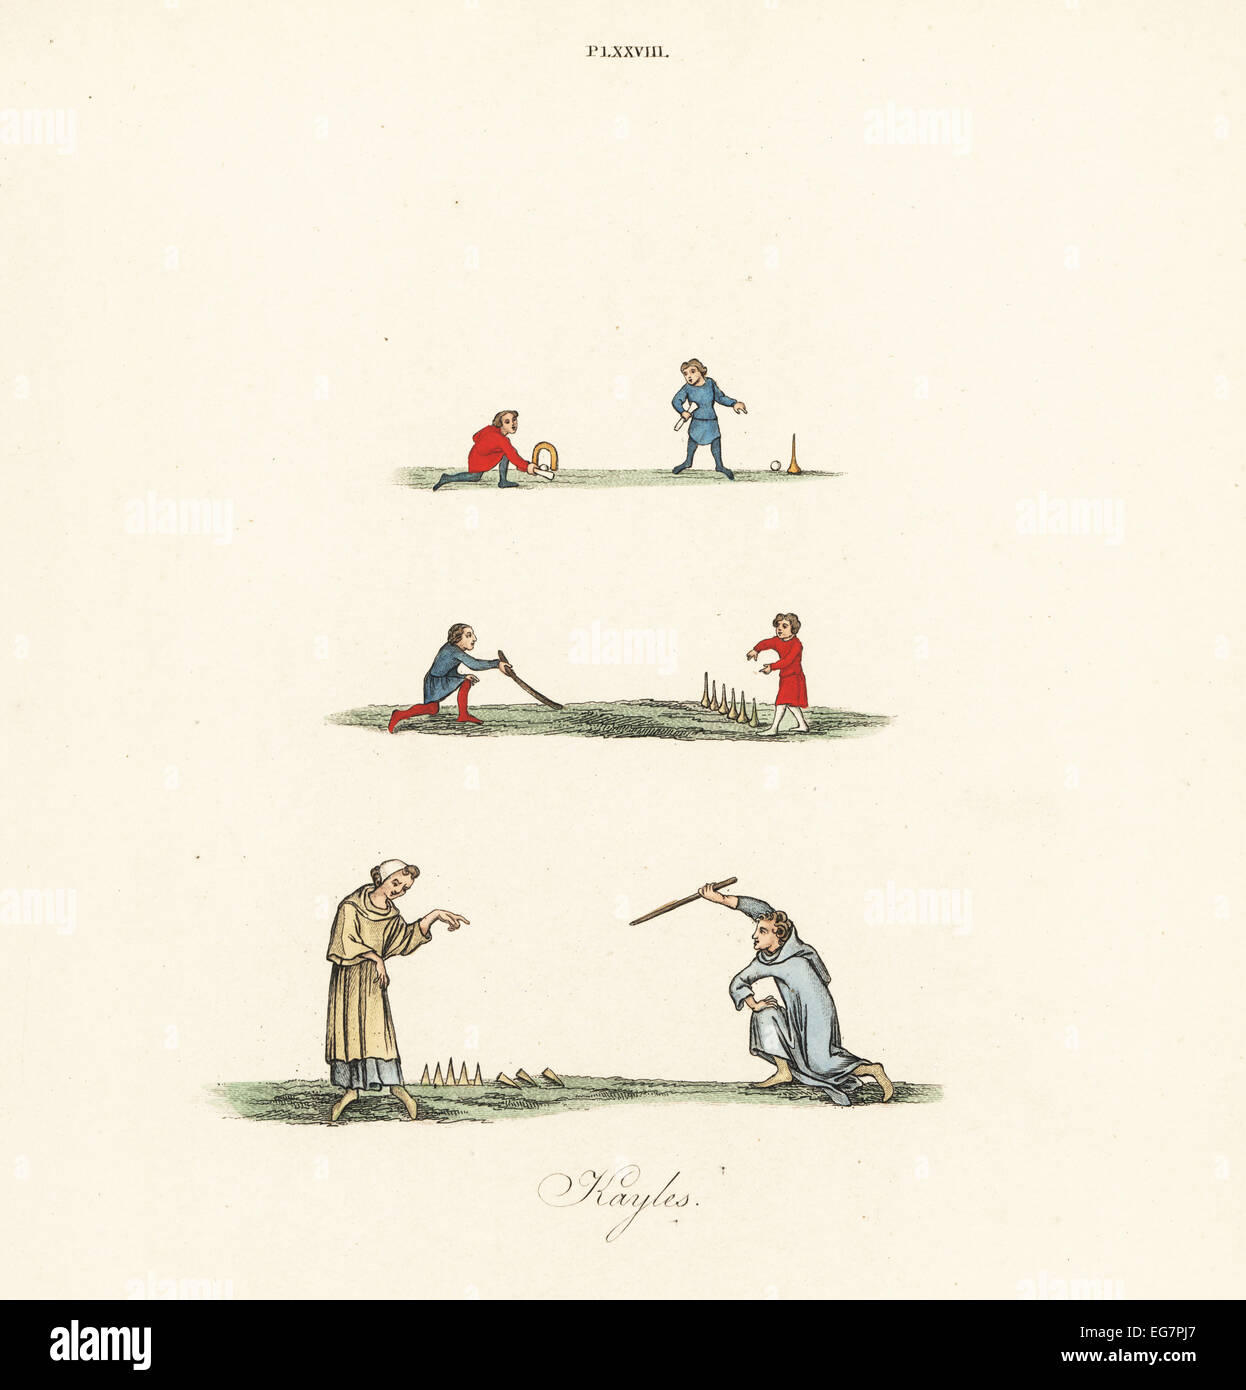 Medieval kayles or skittles. Game played with ball, stick, hoop and target (top), men playing kayles or skittles with stick and six pins (middle), and men playing kayles or skittles with stick and eight pins (bottom). Stock Photo